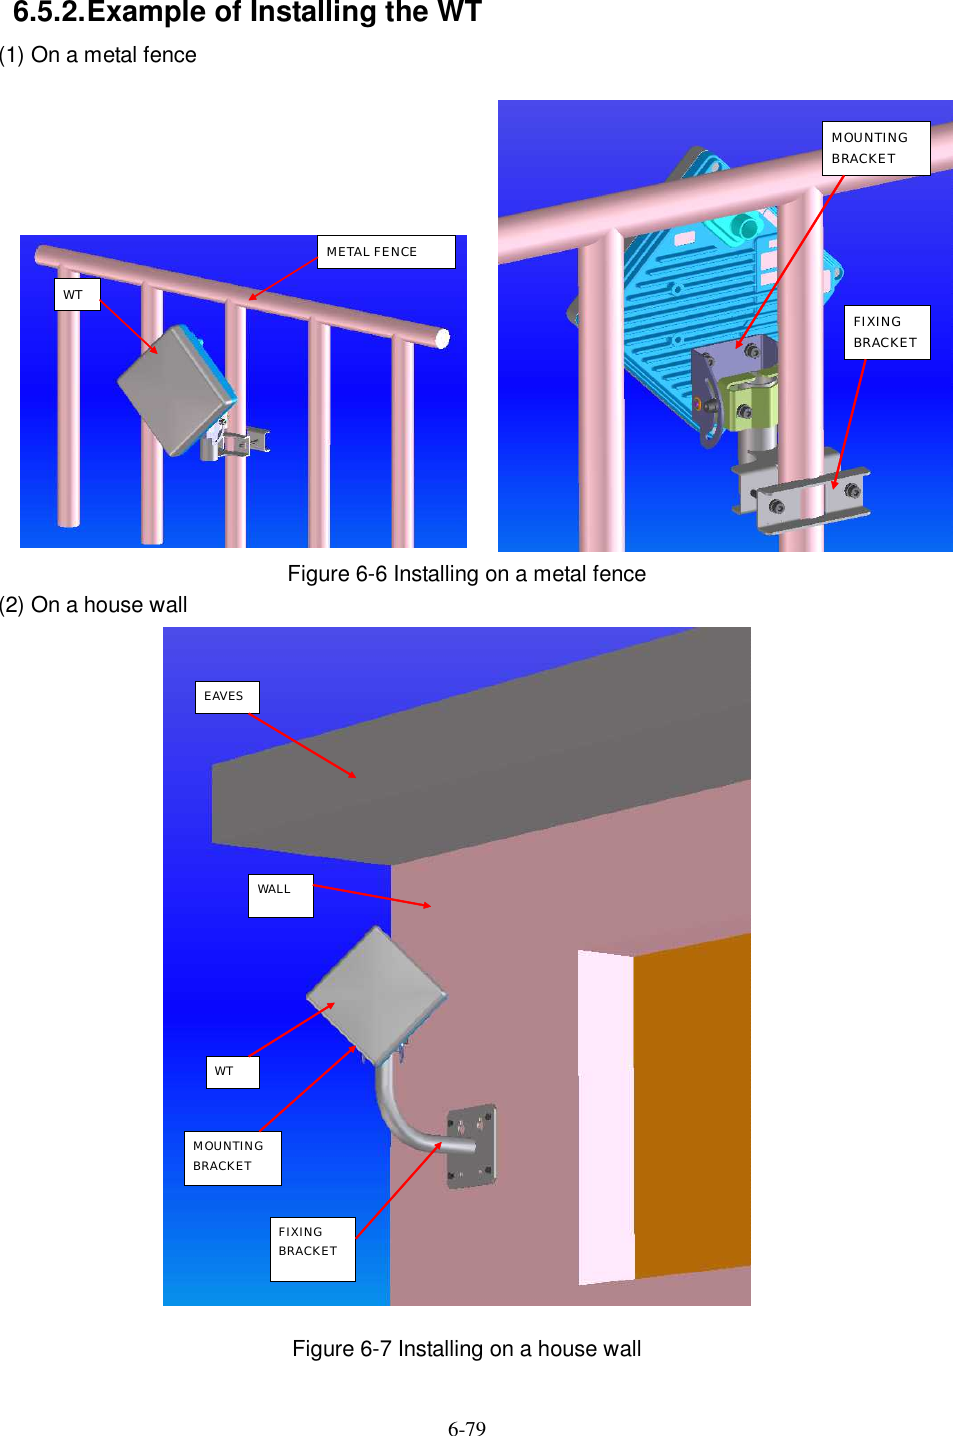   6-79   6.5.2. Example of Installing the WT (1) On a metal fence              Figure 6-6 Installing on a metal fence (2) On a house wall                    Figure 6-7 Installing on a house wall MOUNTING BRACKET FIXING  BRACKET METAL FENCE WT  EAVES WT MOUNTING BRACKET FIXING BRACKET WALL 